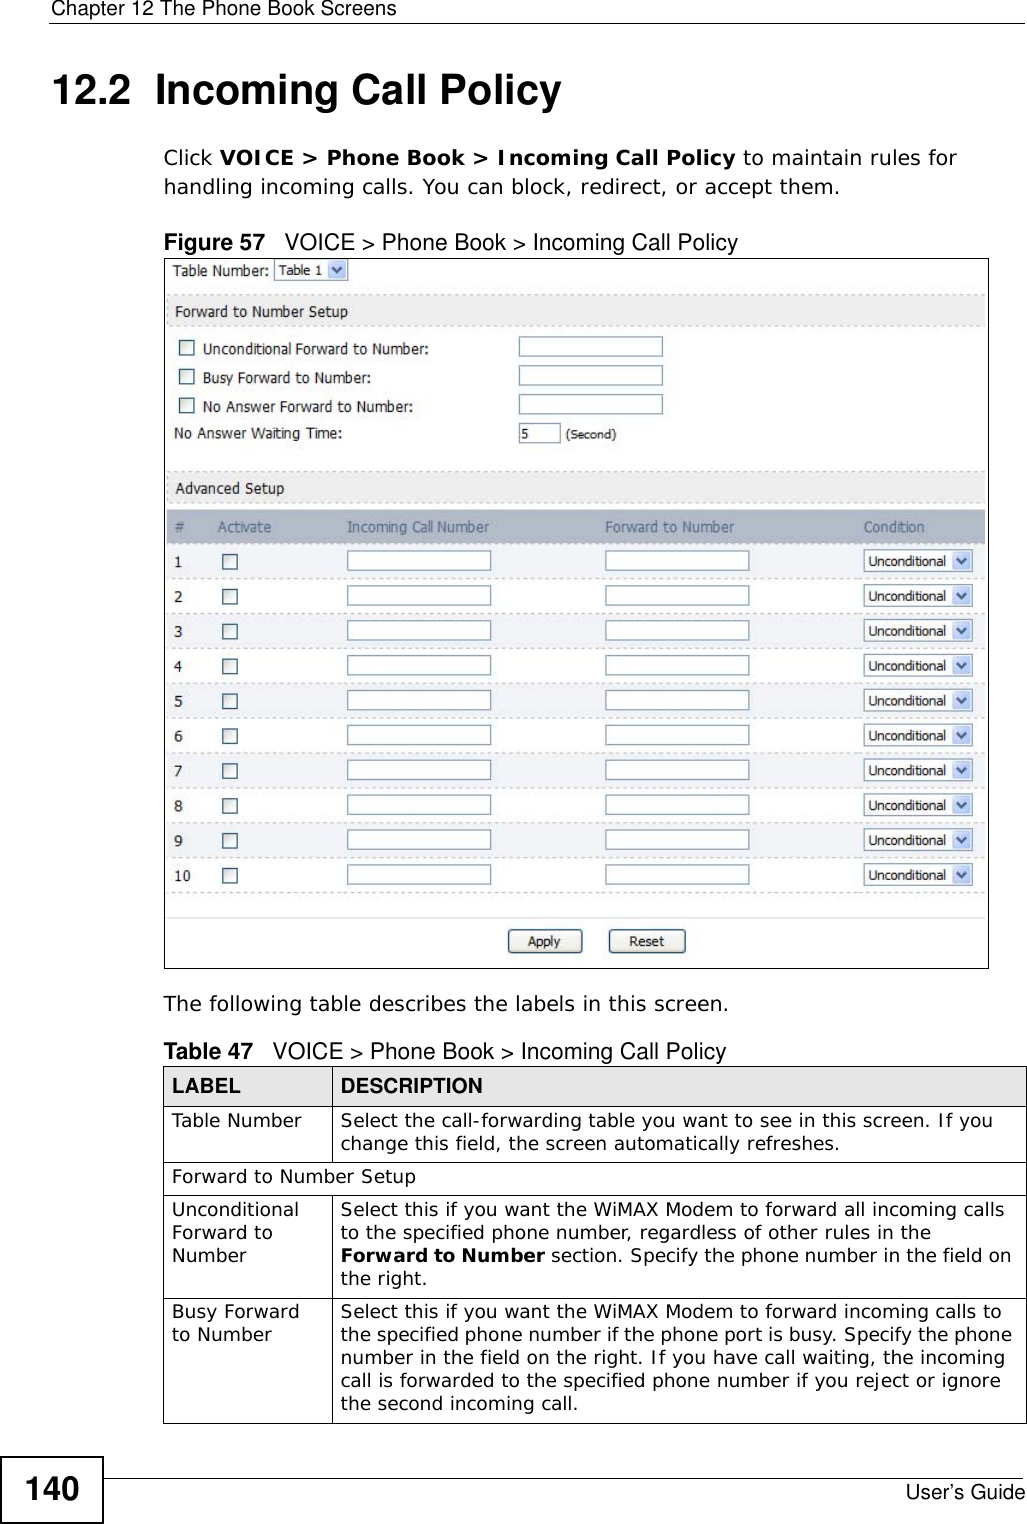 Chapter 12 The Phone Book ScreensUser’s Guide14012.2  Incoming Call PolicyClick VOICE &gt; Phone Book &gt; Incoming Call Policy to maintain rules for handling incoming calls. You can block, redirect, or accept them.Figure 57   VOICE &gt; Phone Book &gt; Incoming Call PolicyThe following table describes the labels in this screen.  Table 47   VOICE &gt; Phone Book &gt; Incoming Call PolicyLABEL DESCRIPTIONTable Number Select the call-forwarding table you want to see in this screen. If you change this field, the screen automatically refreshes.Forward to Number SetupUnconditional Forward to NumberSelect this if you want the WiMAX Modem to forward all incoming calls to the specified phone number, regardless of other rules in the Forward to Number section. Specify the phone number in the field on the right.Busy Forward to Number Select this if you want the WiMAX Modem to forward incoming calls to the specified phone number if the phone port is busy. Specify the phone number in the field on the right. If you have call waiting, the incoming call is forwarded to the specified phone number if you reject or ignore the second incoming call.